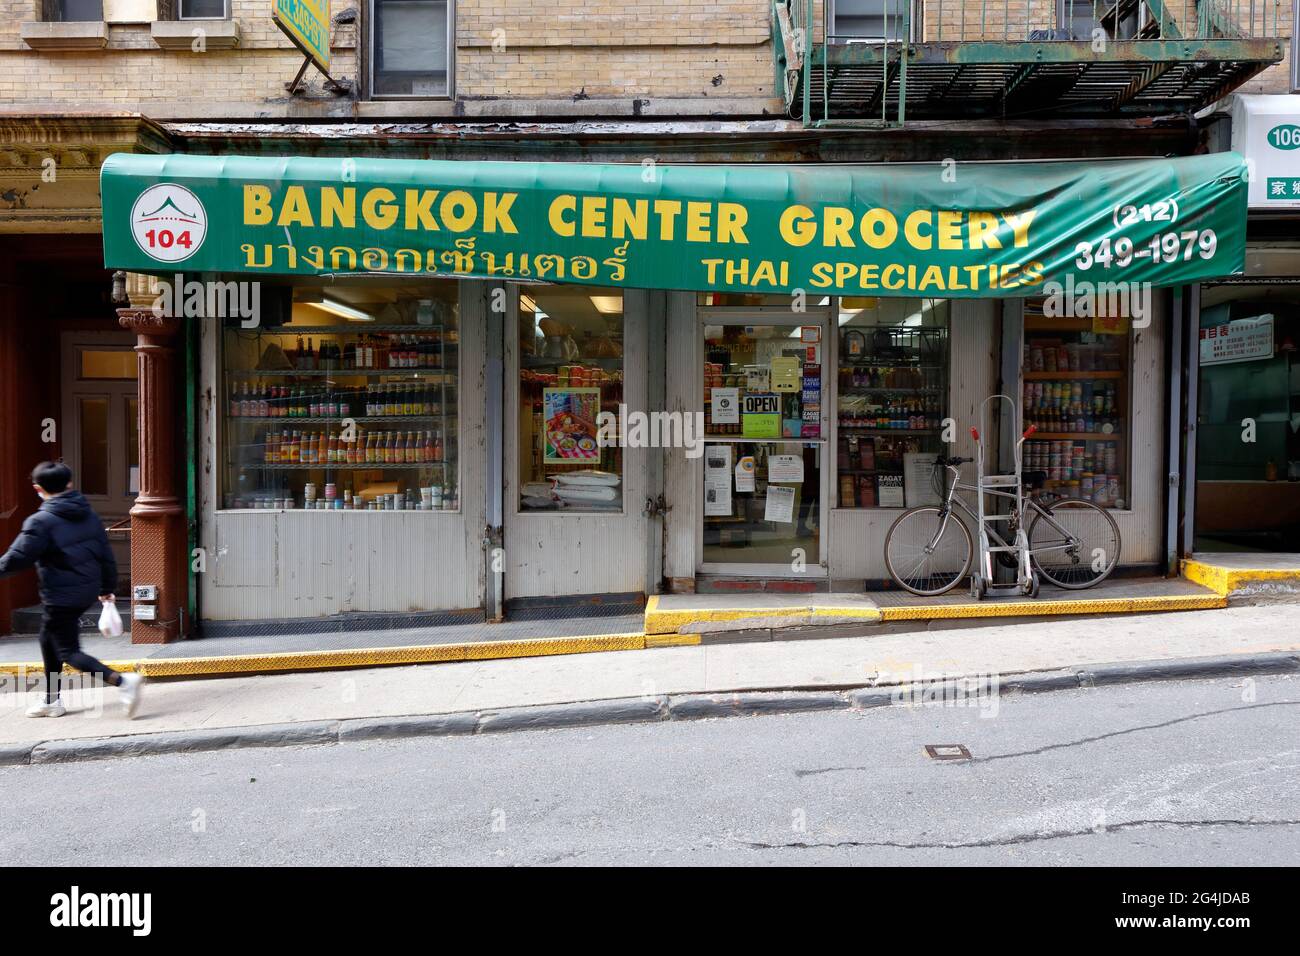 Bangkok Center Grocery, 104 Mosco St, New York, NY. exterior storefront of Thai grocer in Manhattan Chinatown. Stock Photo